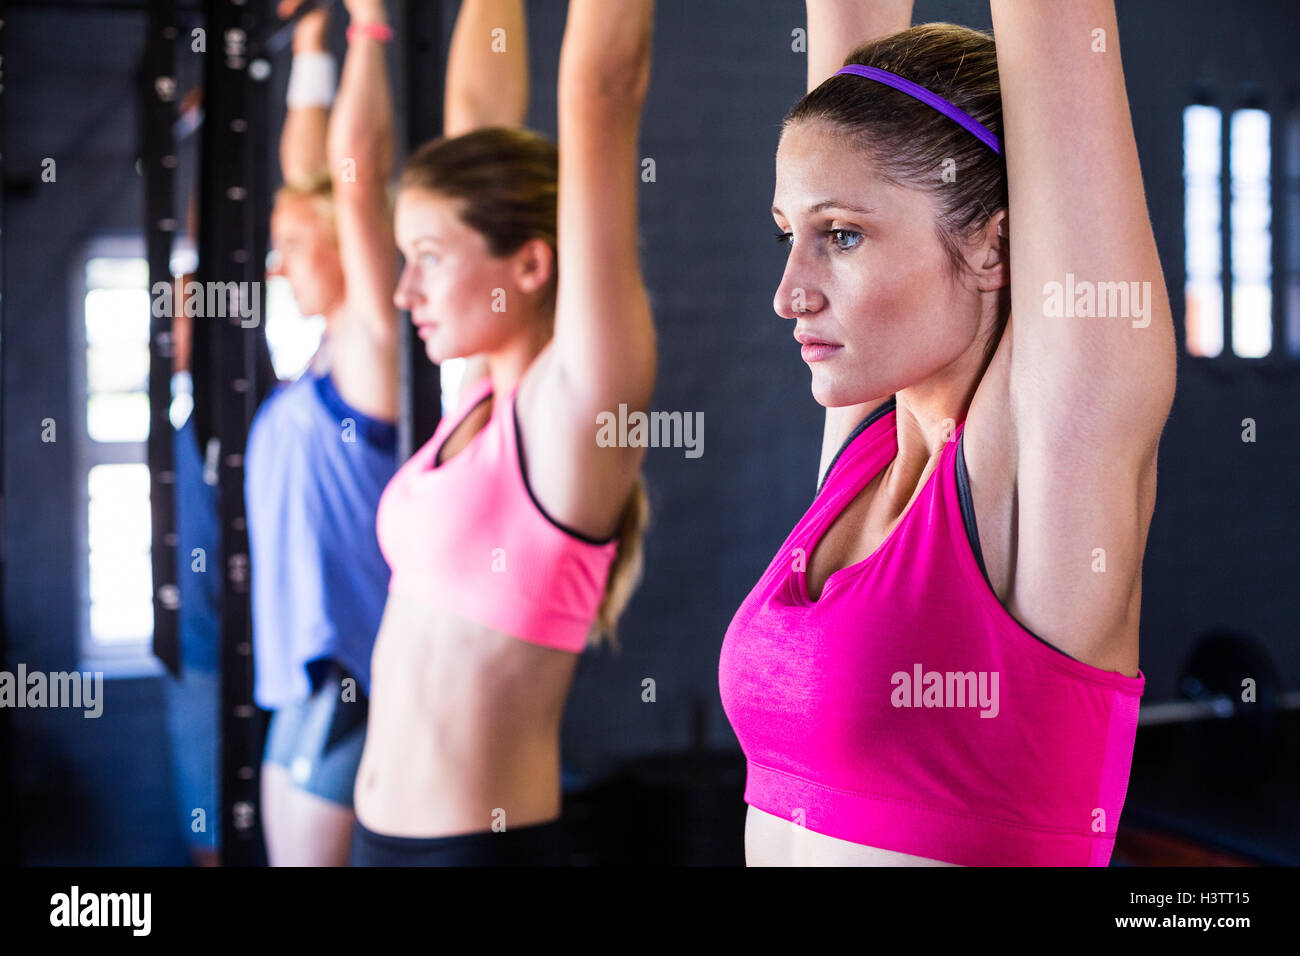 Woman doing chin-ups in gym Stock Photo